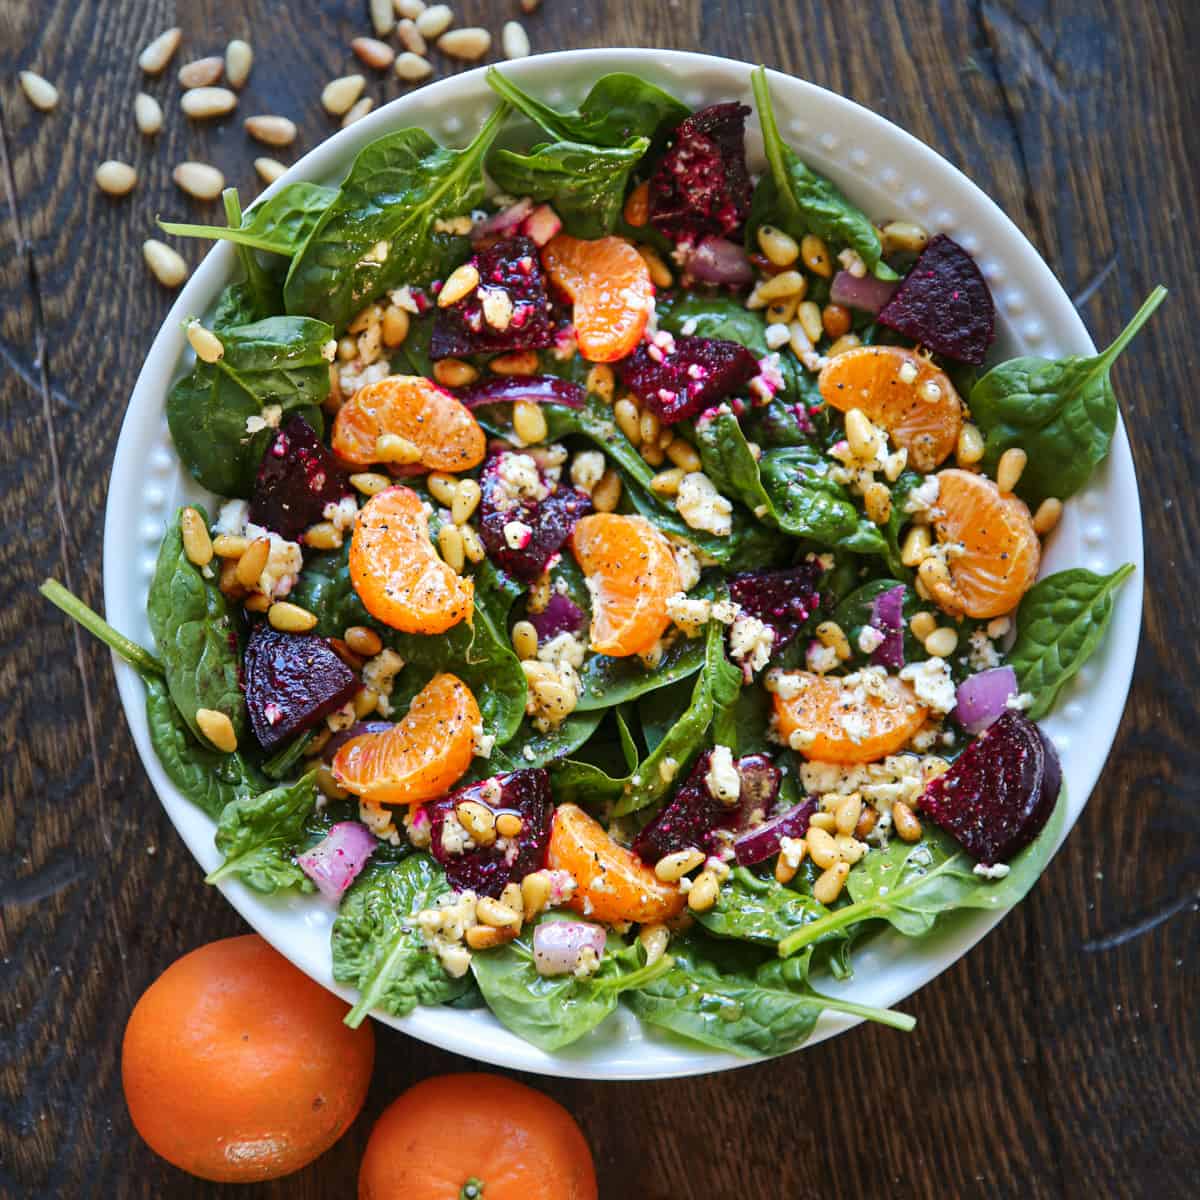 Beet Salad with spinach, mandarin oranges, red onion, pine nuts, feta cheese, and homemade Honey-Mustard Lemon Vinaigrette - in a white bowl.